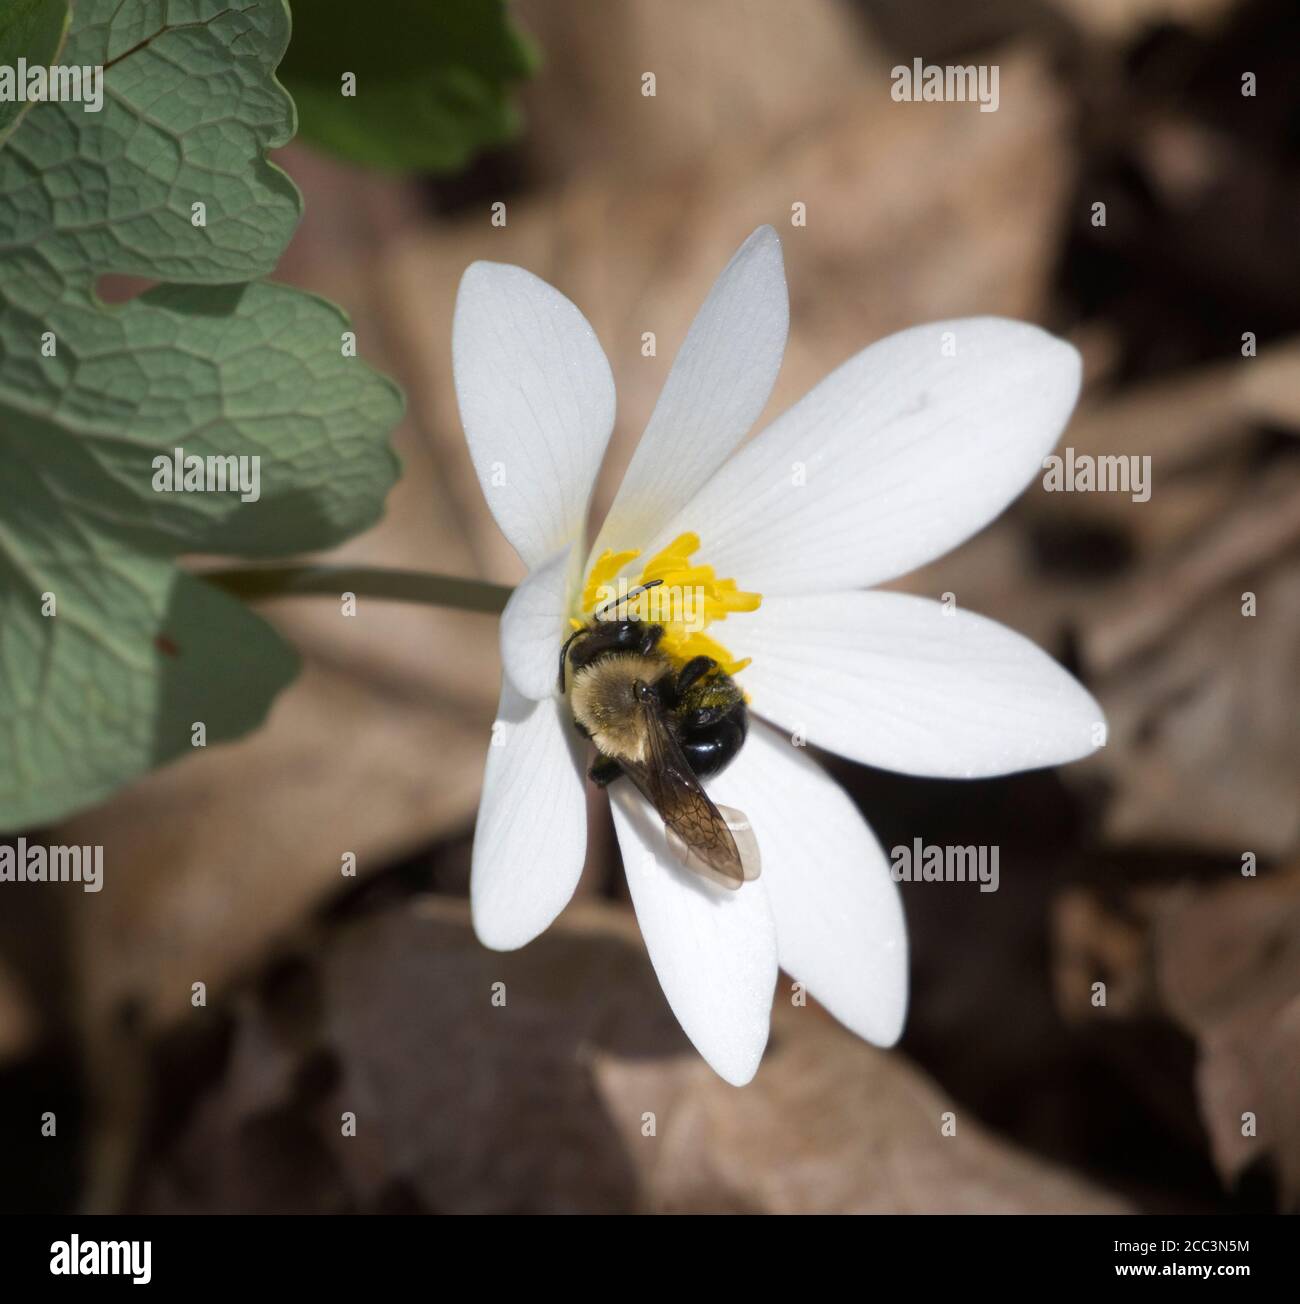 Large mining bee, Andrena sp., on Bloodroot, Sanguinaria canadensis, early spring wildflower Stock Photo